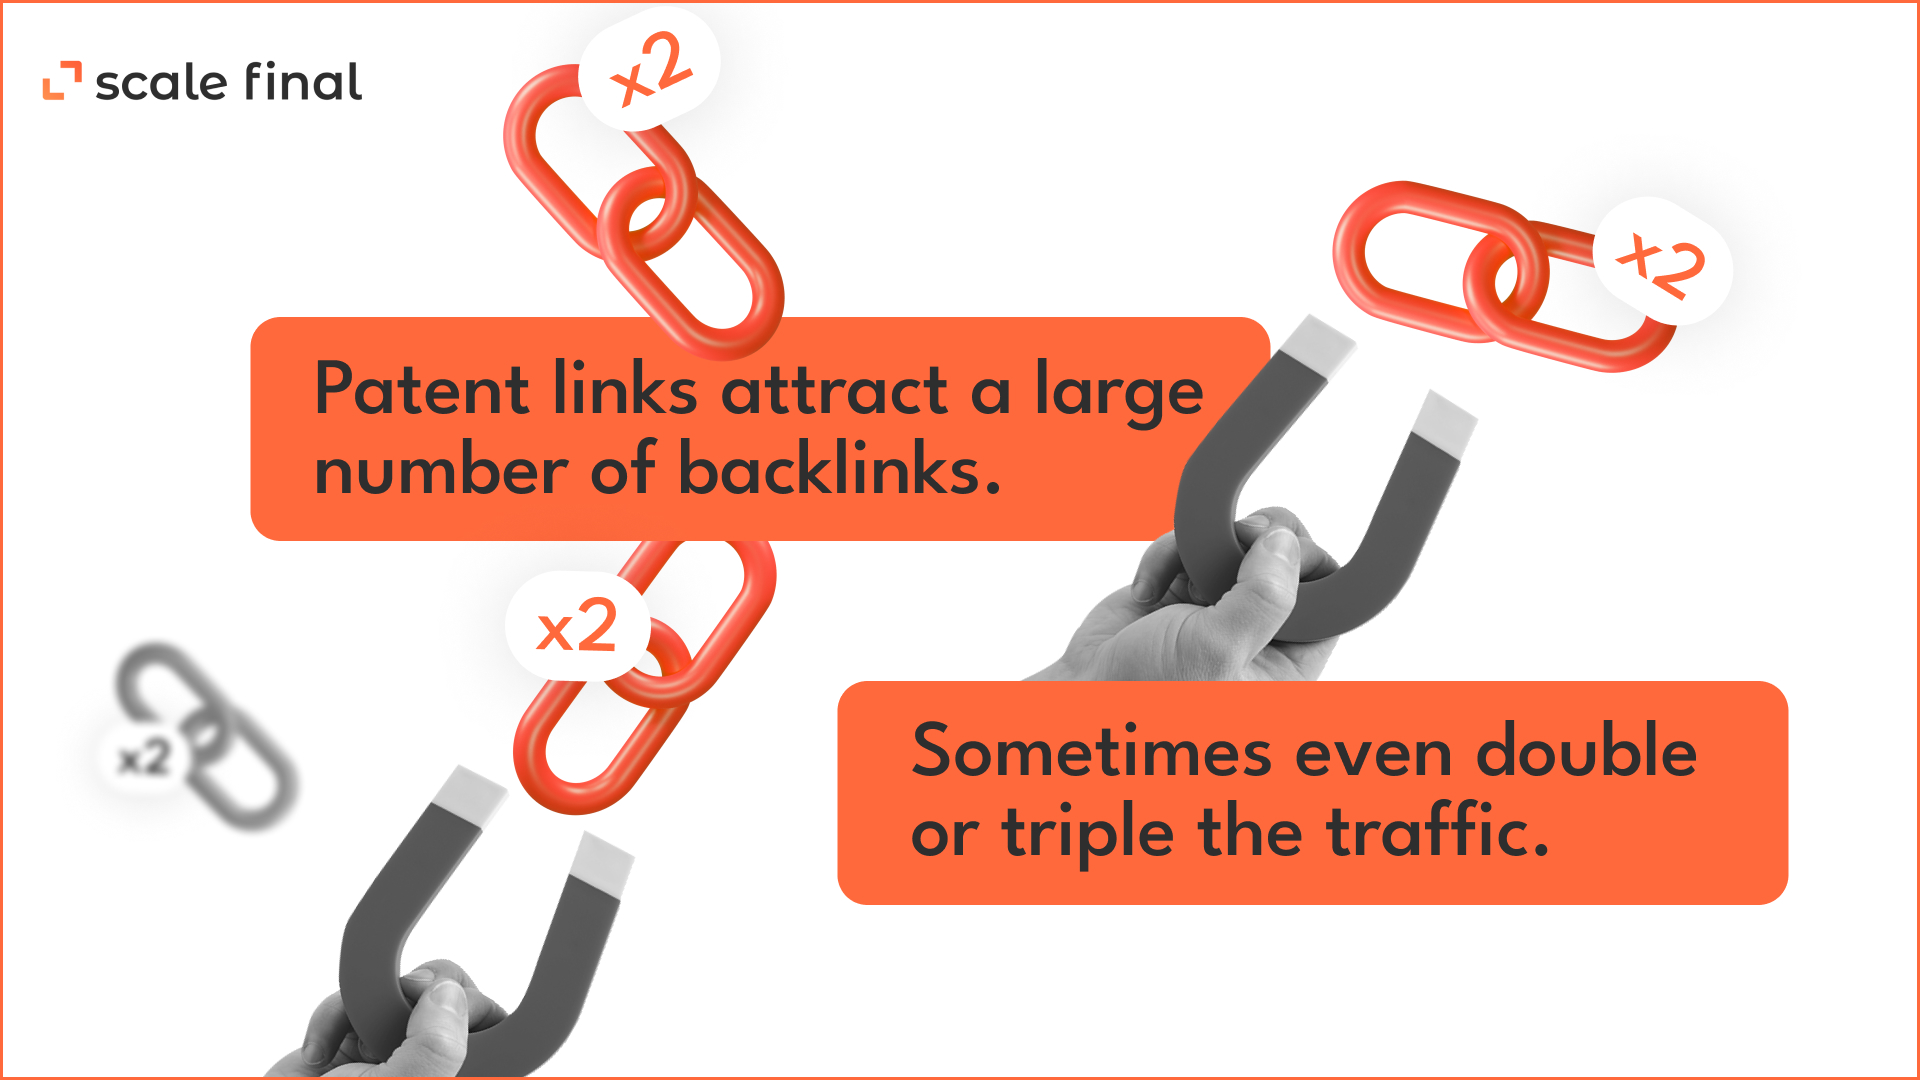 Patent links attract a large number of backlinks. Sometimes even double or triple the traffic.